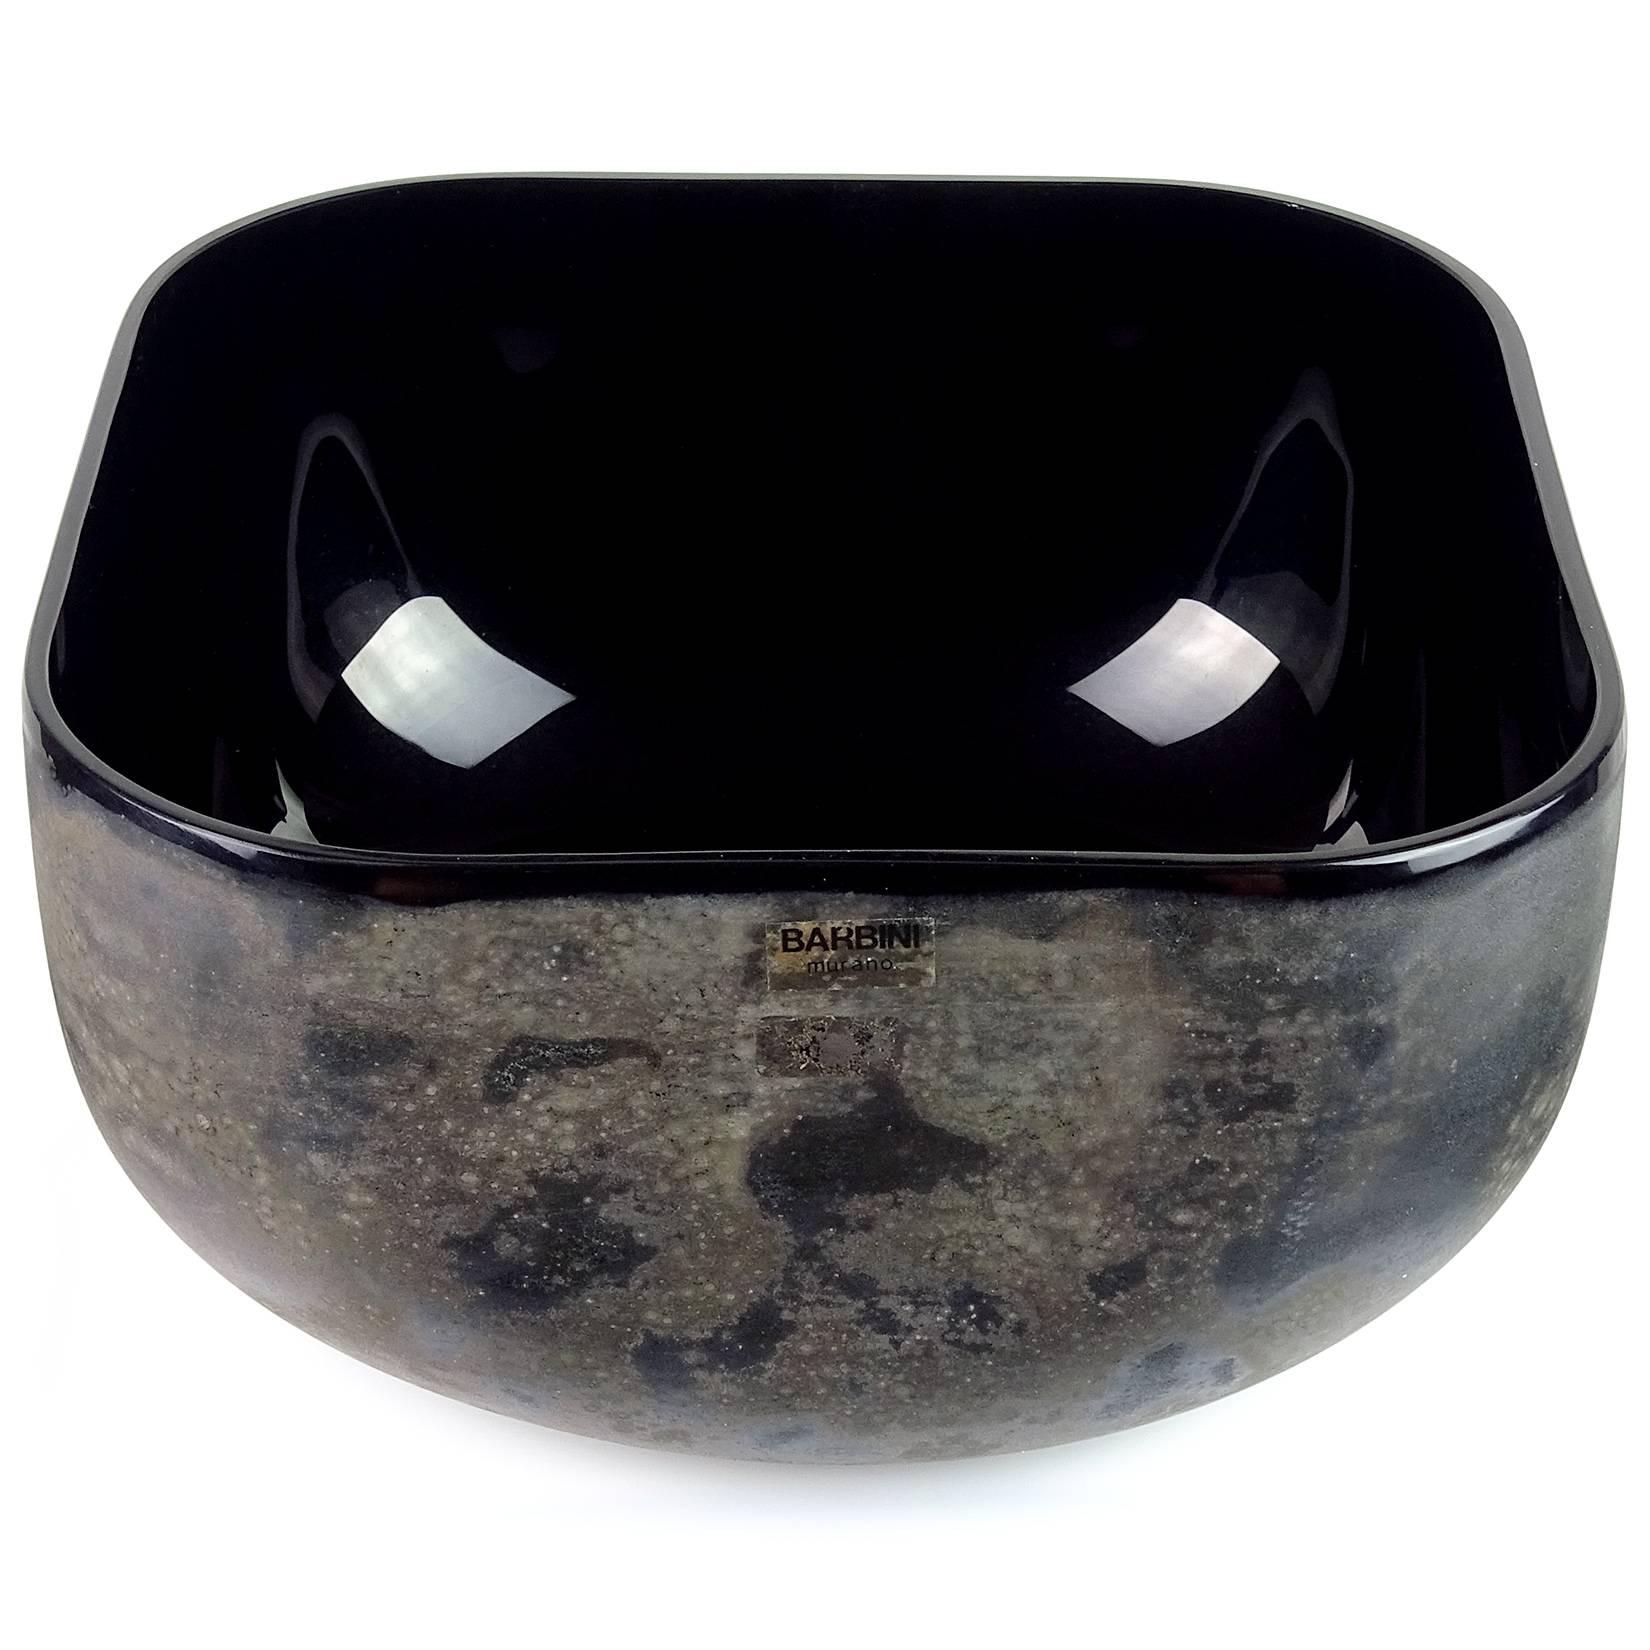 Beautiful large Murano hand blown jet black Italian art glass centerpiece bowl with “Scavo” lava surface texture and slight iridescence. Documented, and fully signed by designer Alfredo Barbini, for Oggetti. It is also numbered. Measures 10 1/4” x